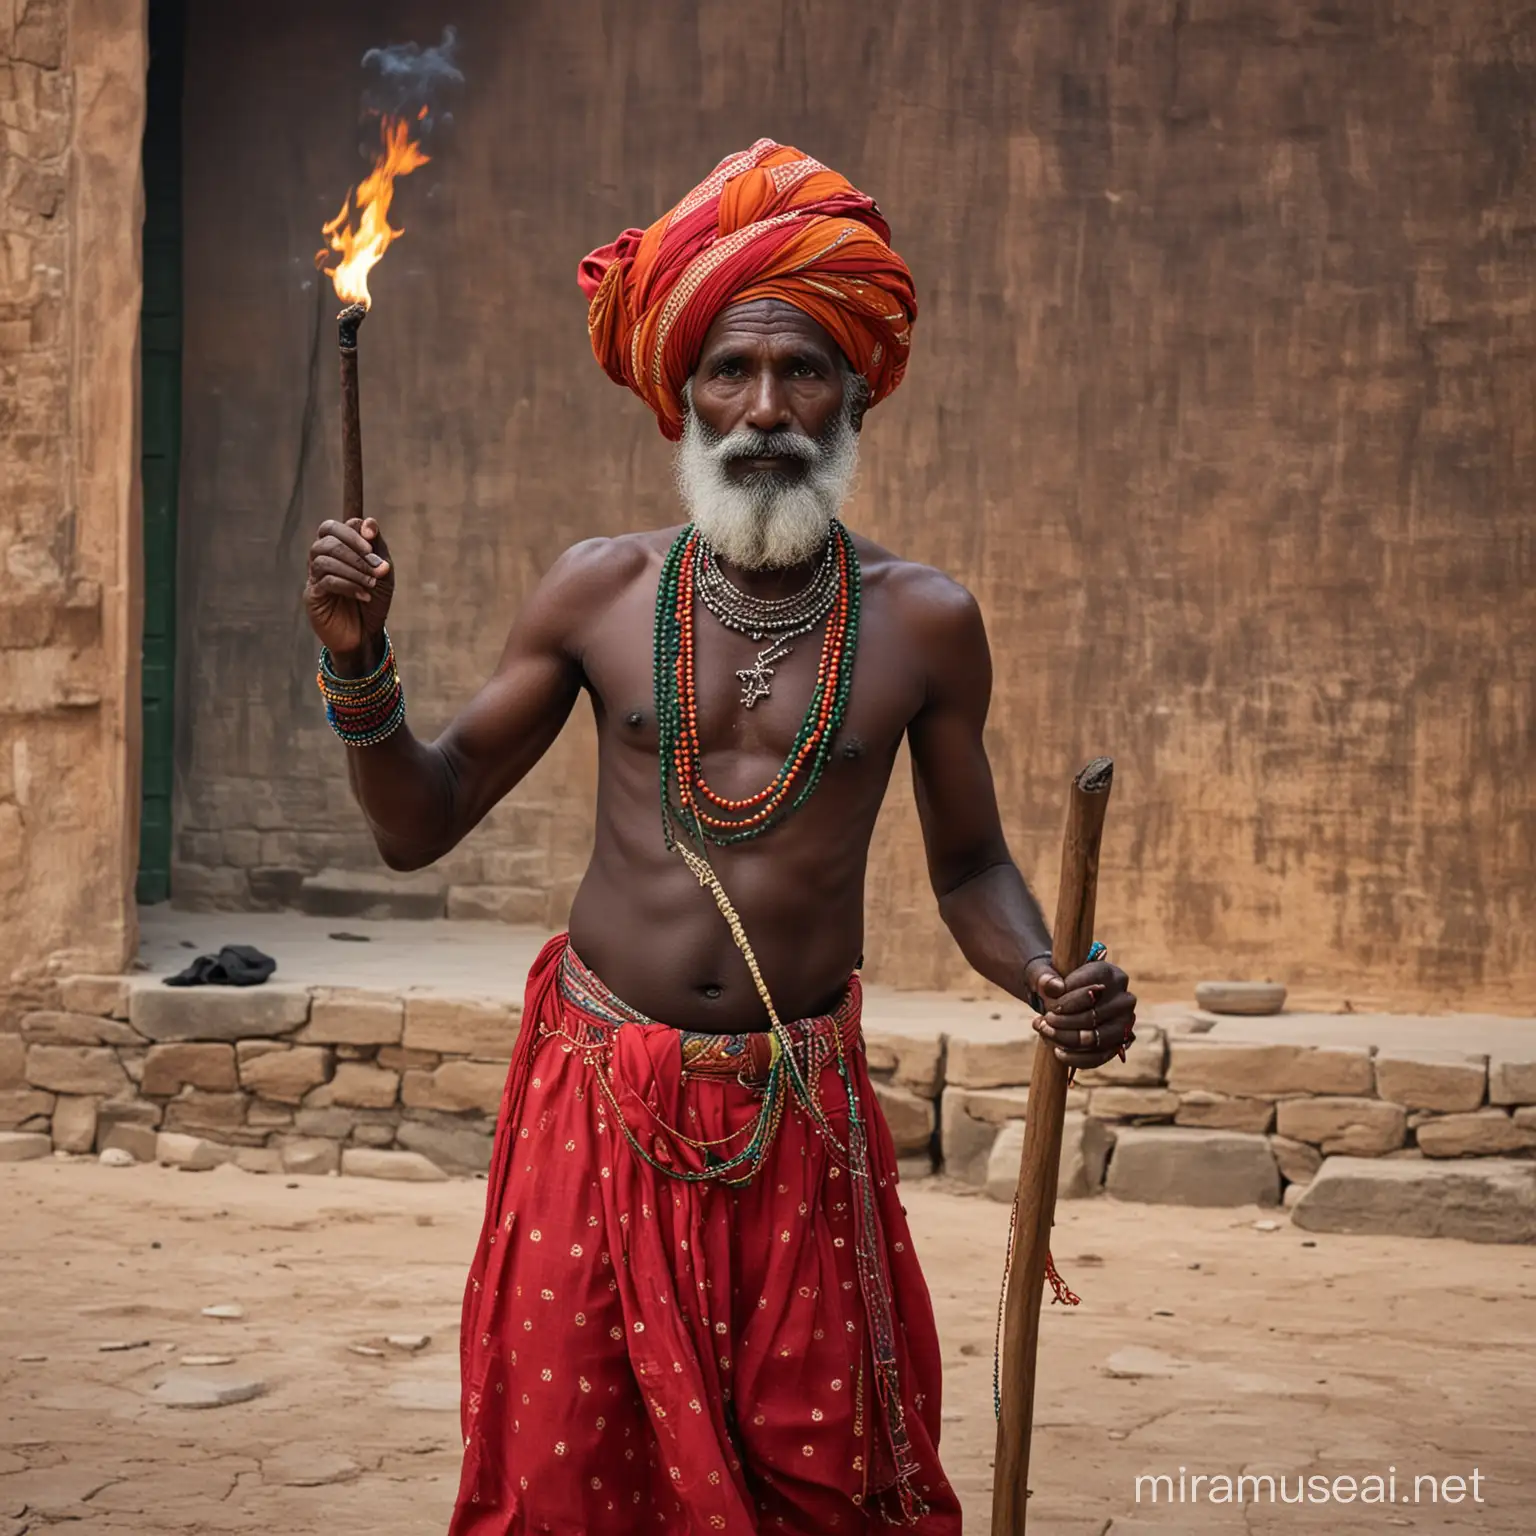 rajasthan farkir skinny sixty years old india black dark skin colorfull clothing   full wide body  is fire breathing before old light green tempel detailted fujixt3 20mm 